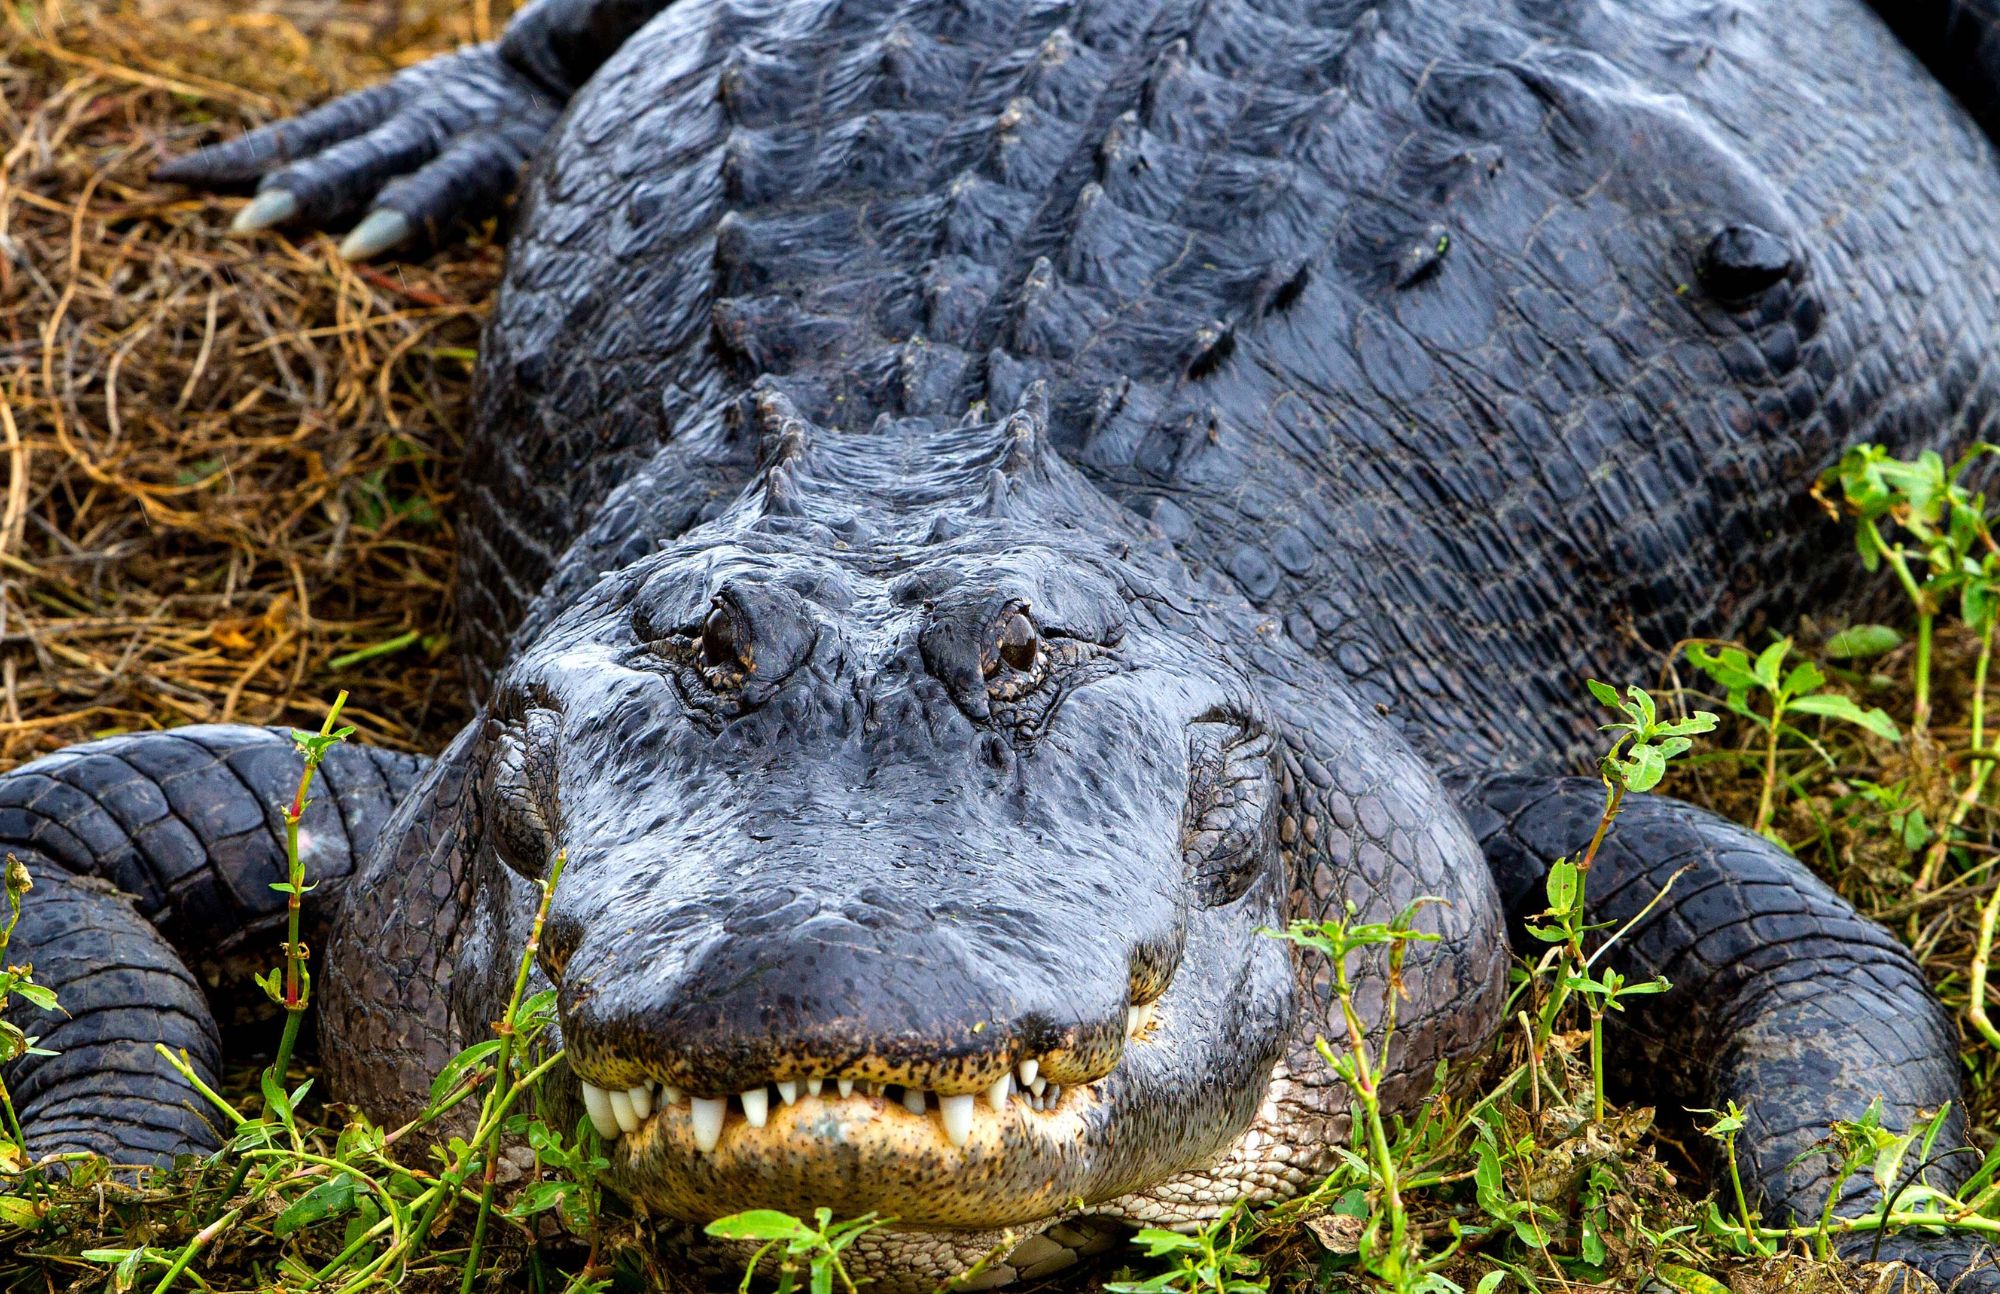 A massive alligator lying in the wet grassland has a long, rounded snout with upward facing nostrils at the end